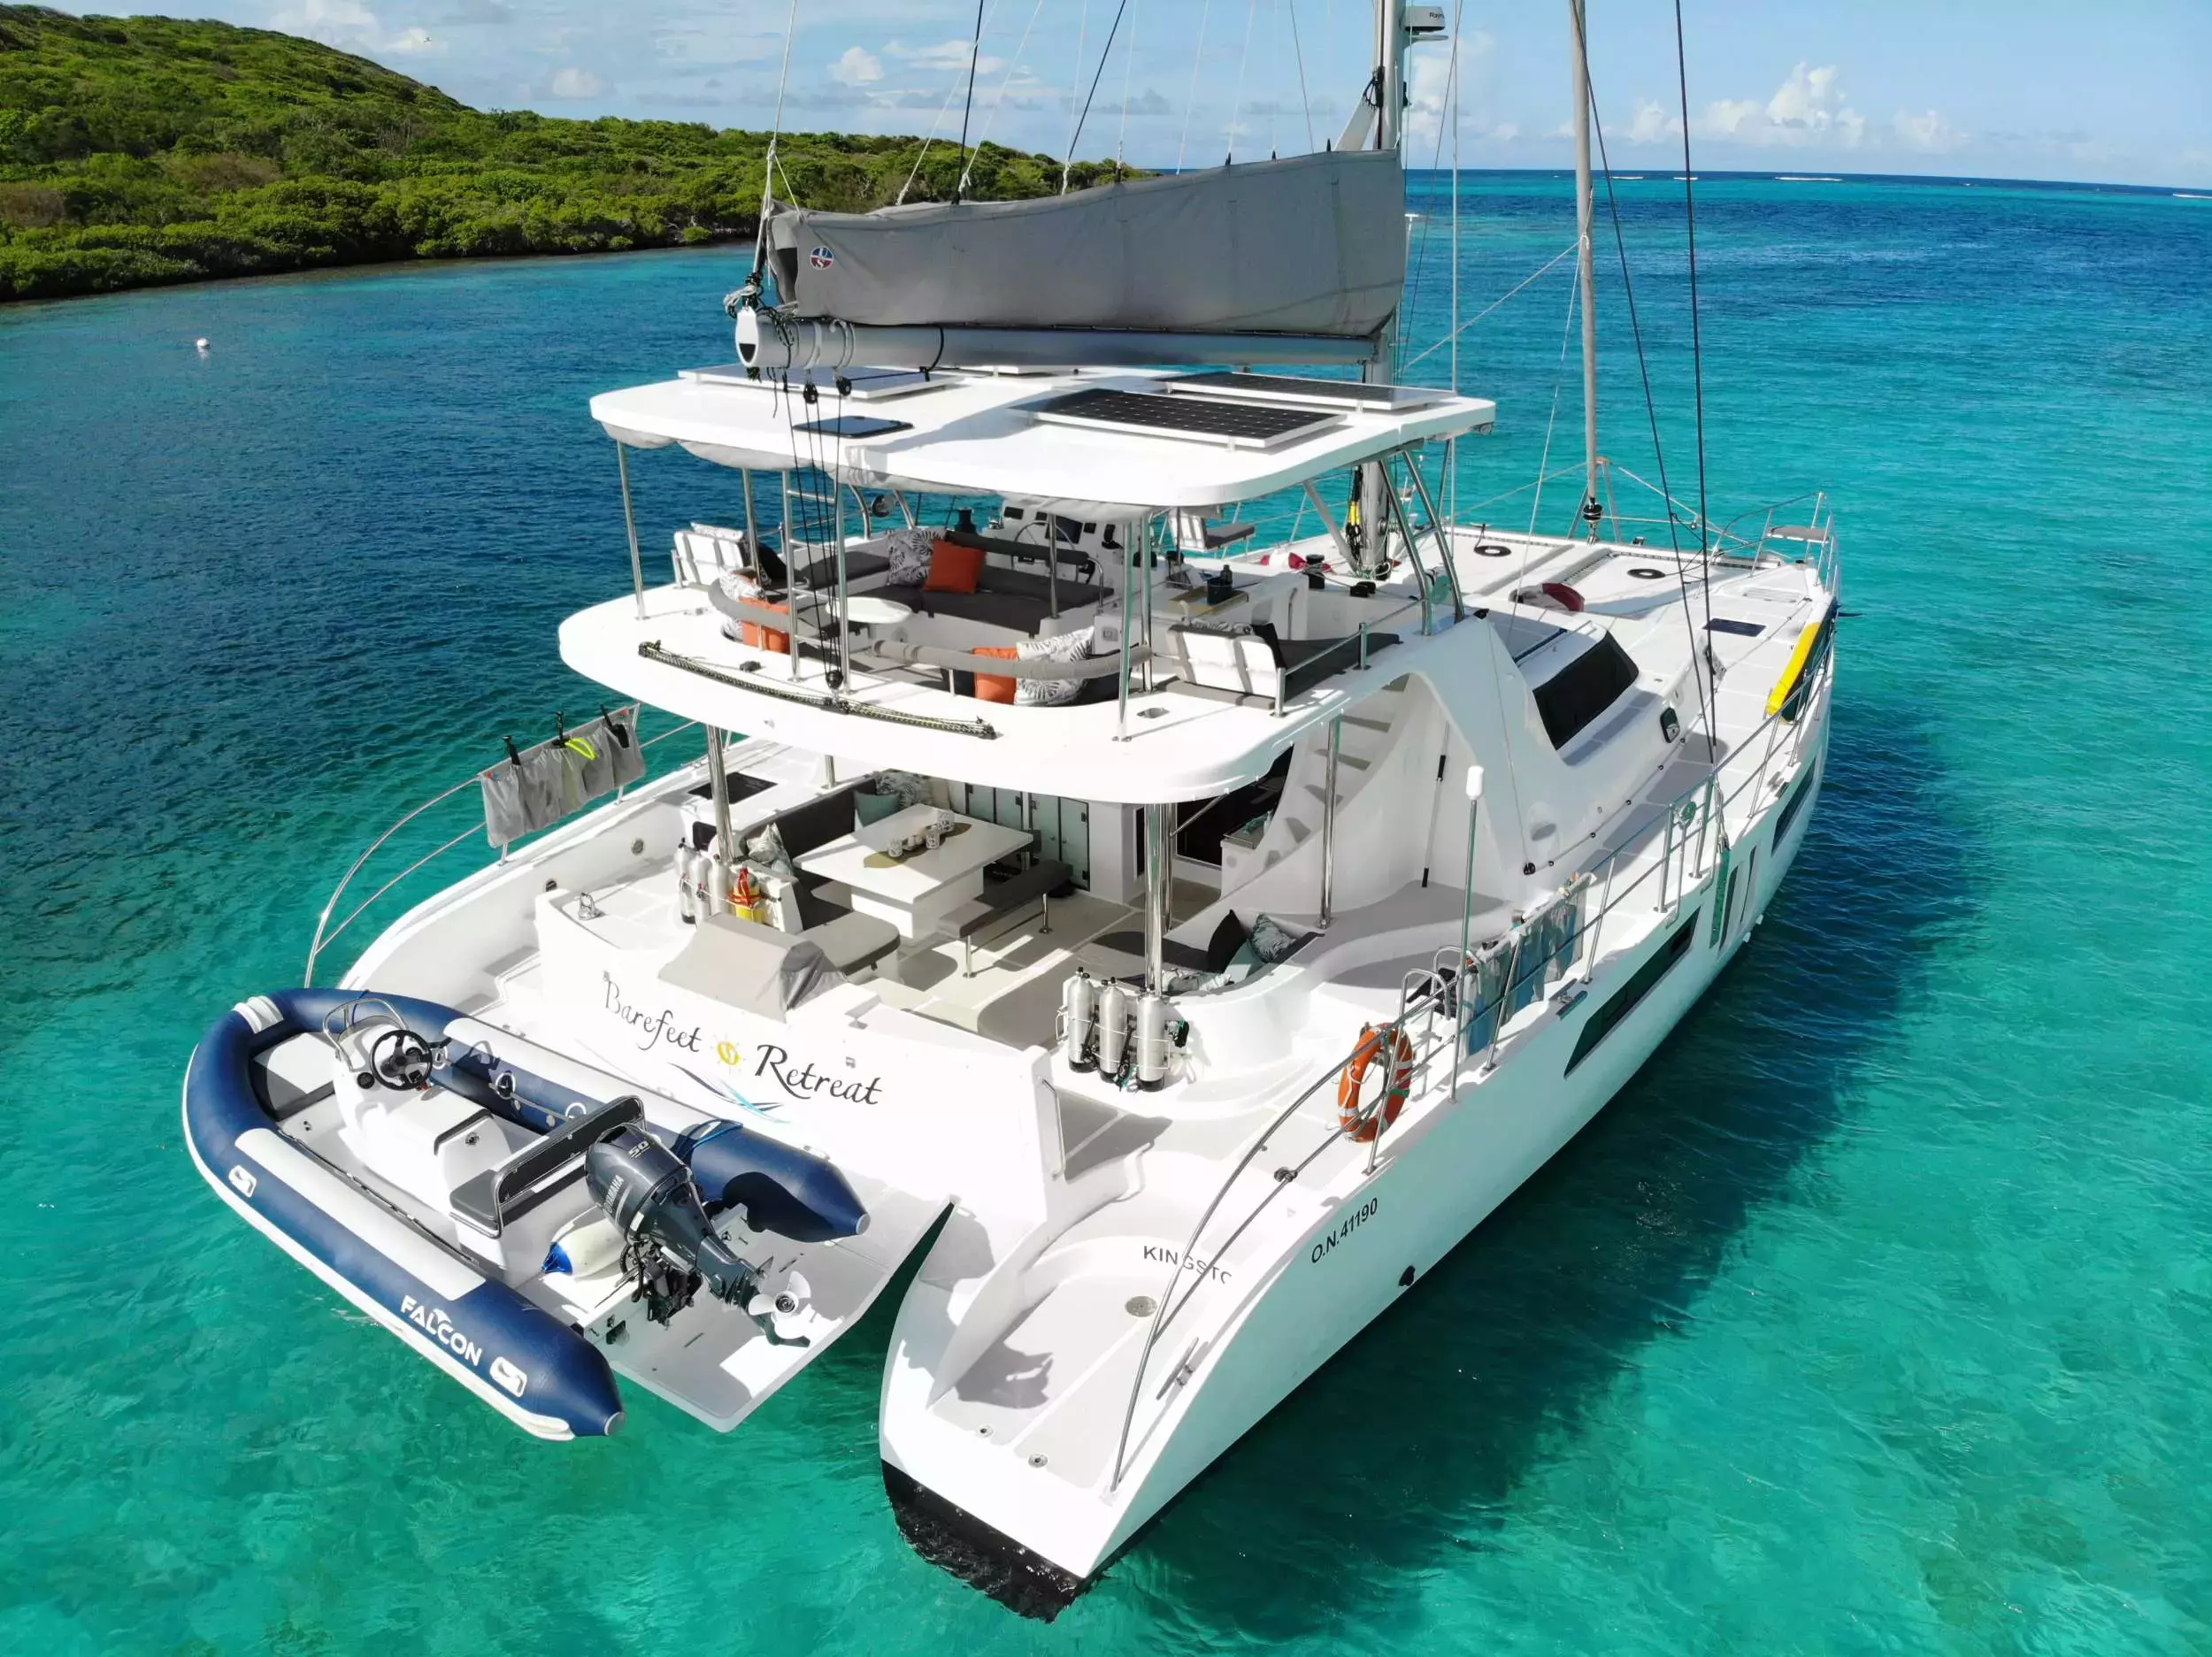 Barefeet Retreat by Royal Cape - Top rates for a Charter of a private Sailing Catamaran in US Virgin Islands